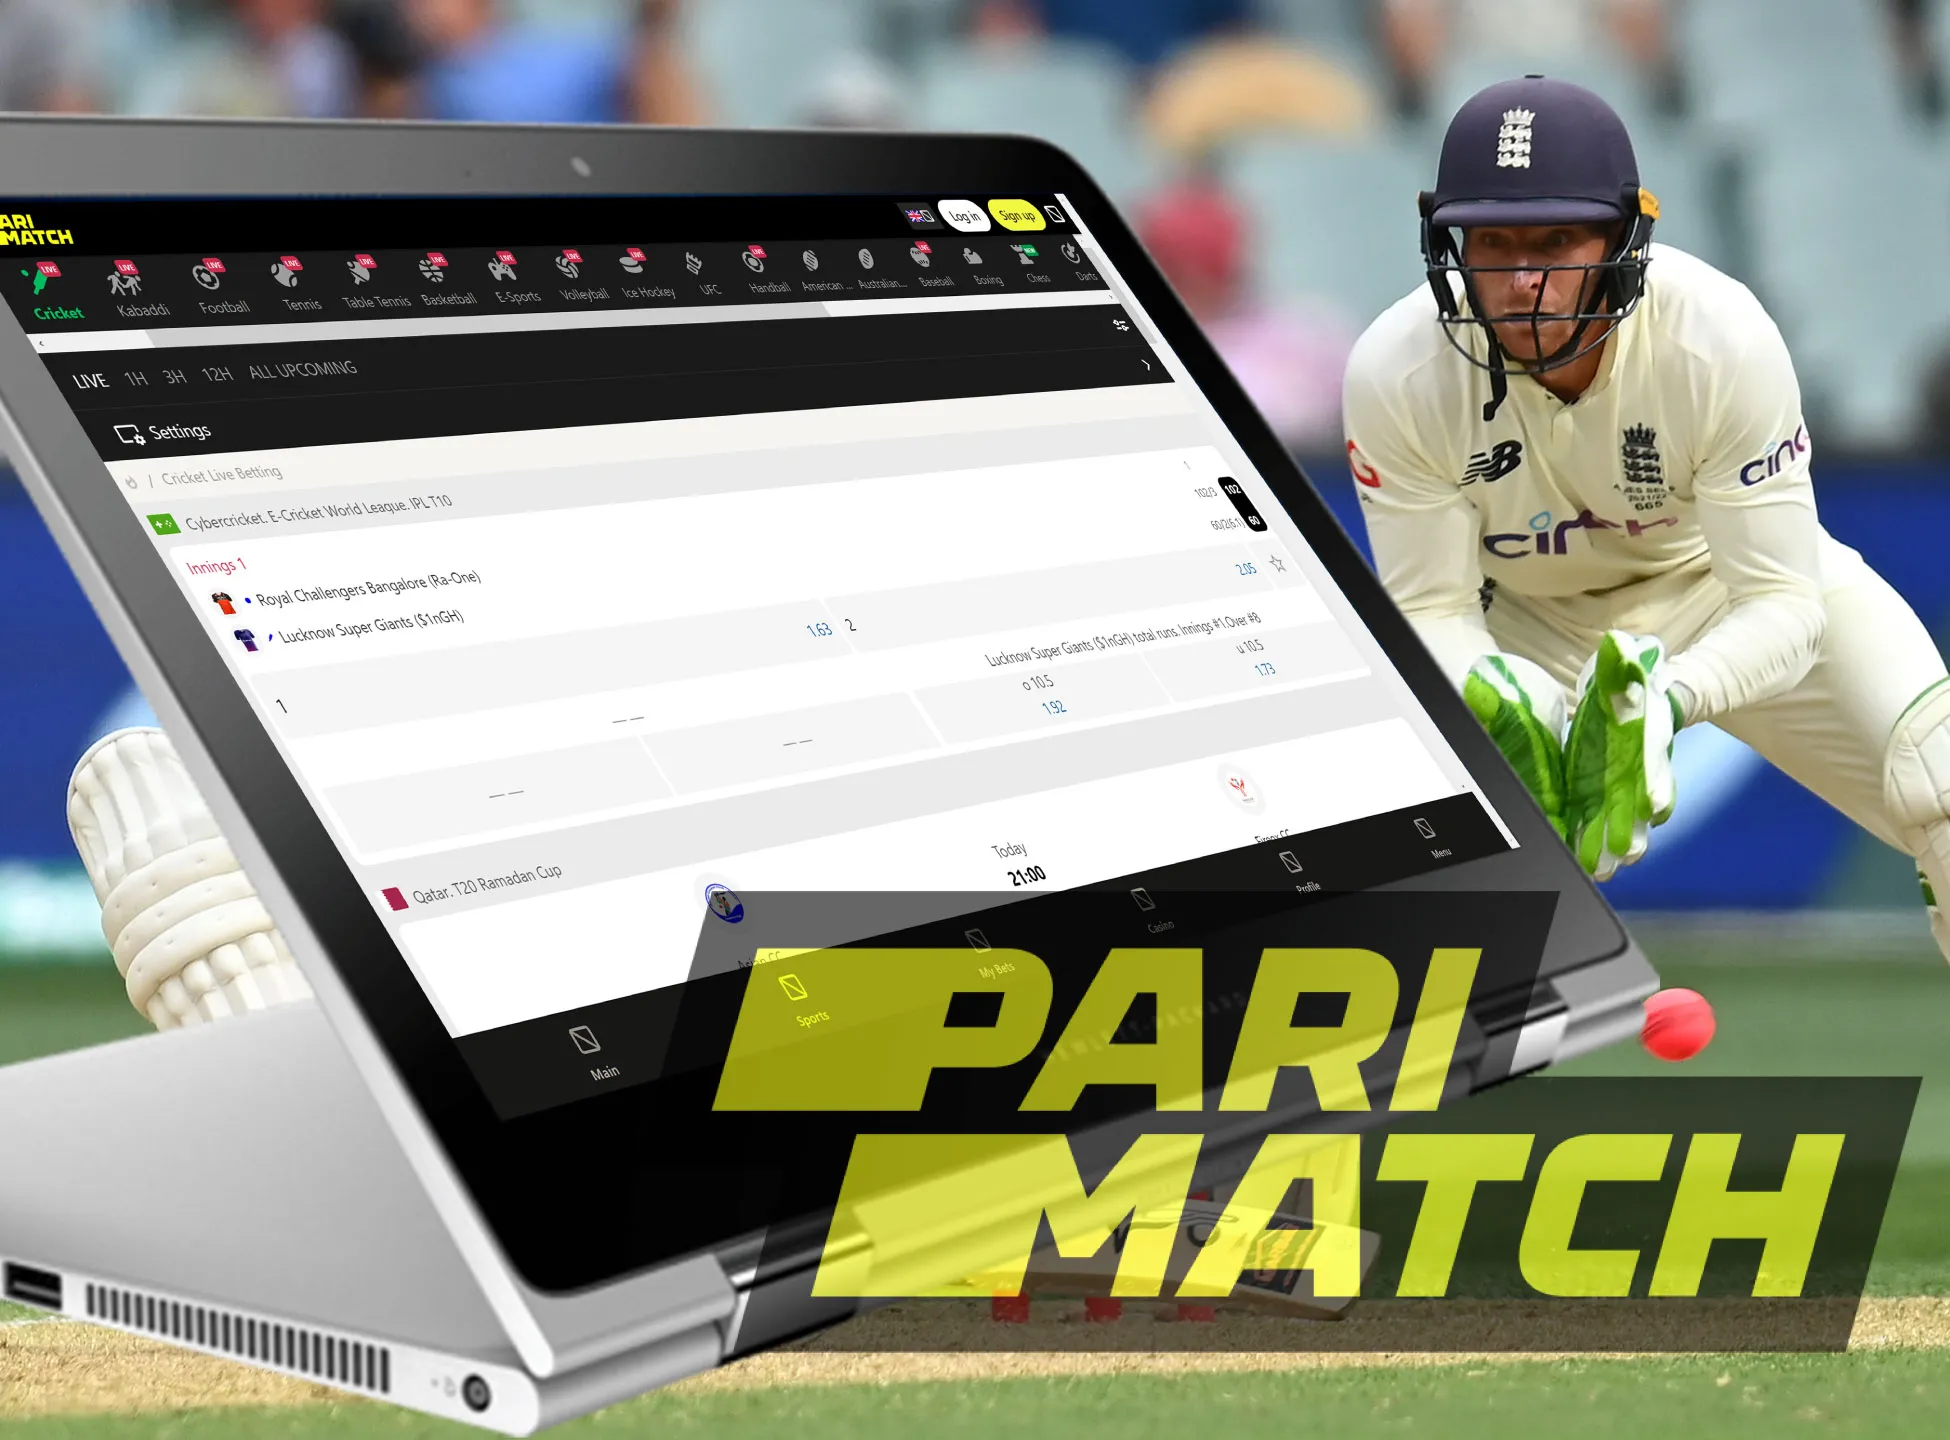 Parimatch is probably the most popular and well-known betting company.